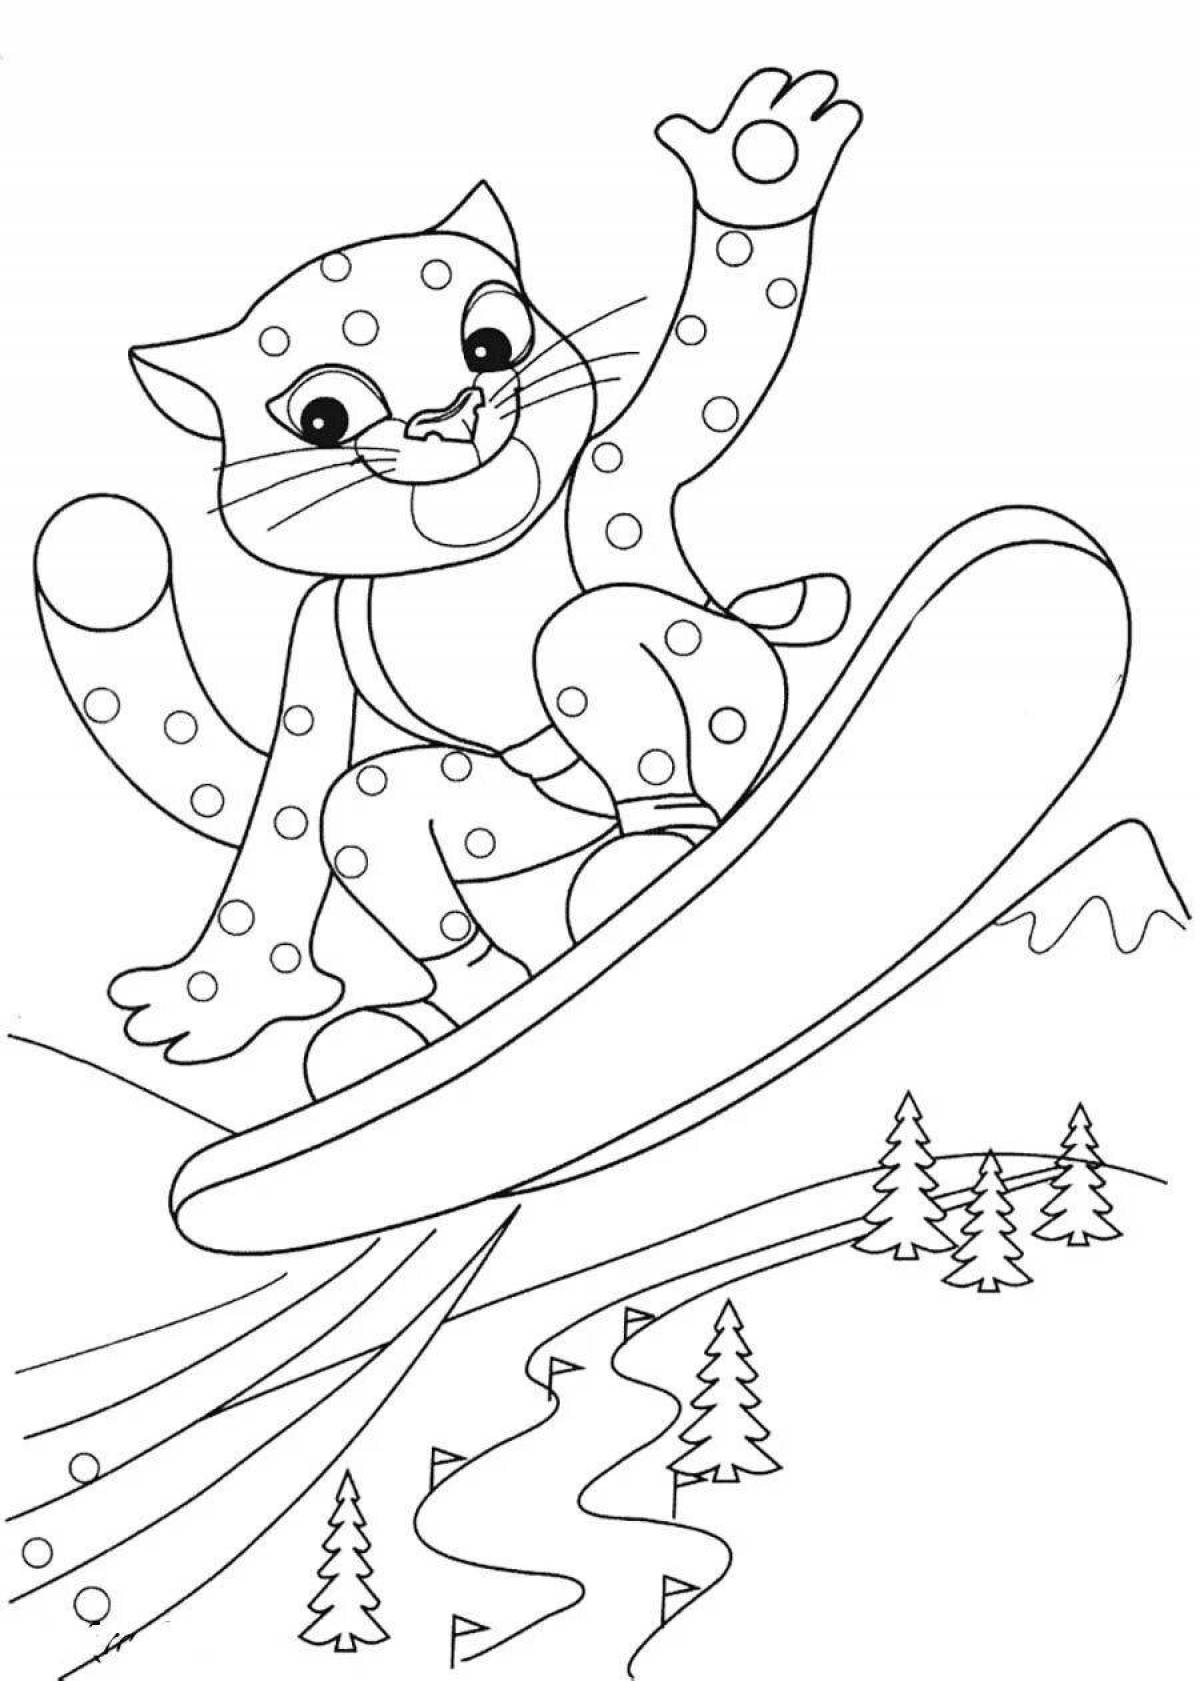 Coloring for children's Olympic sports